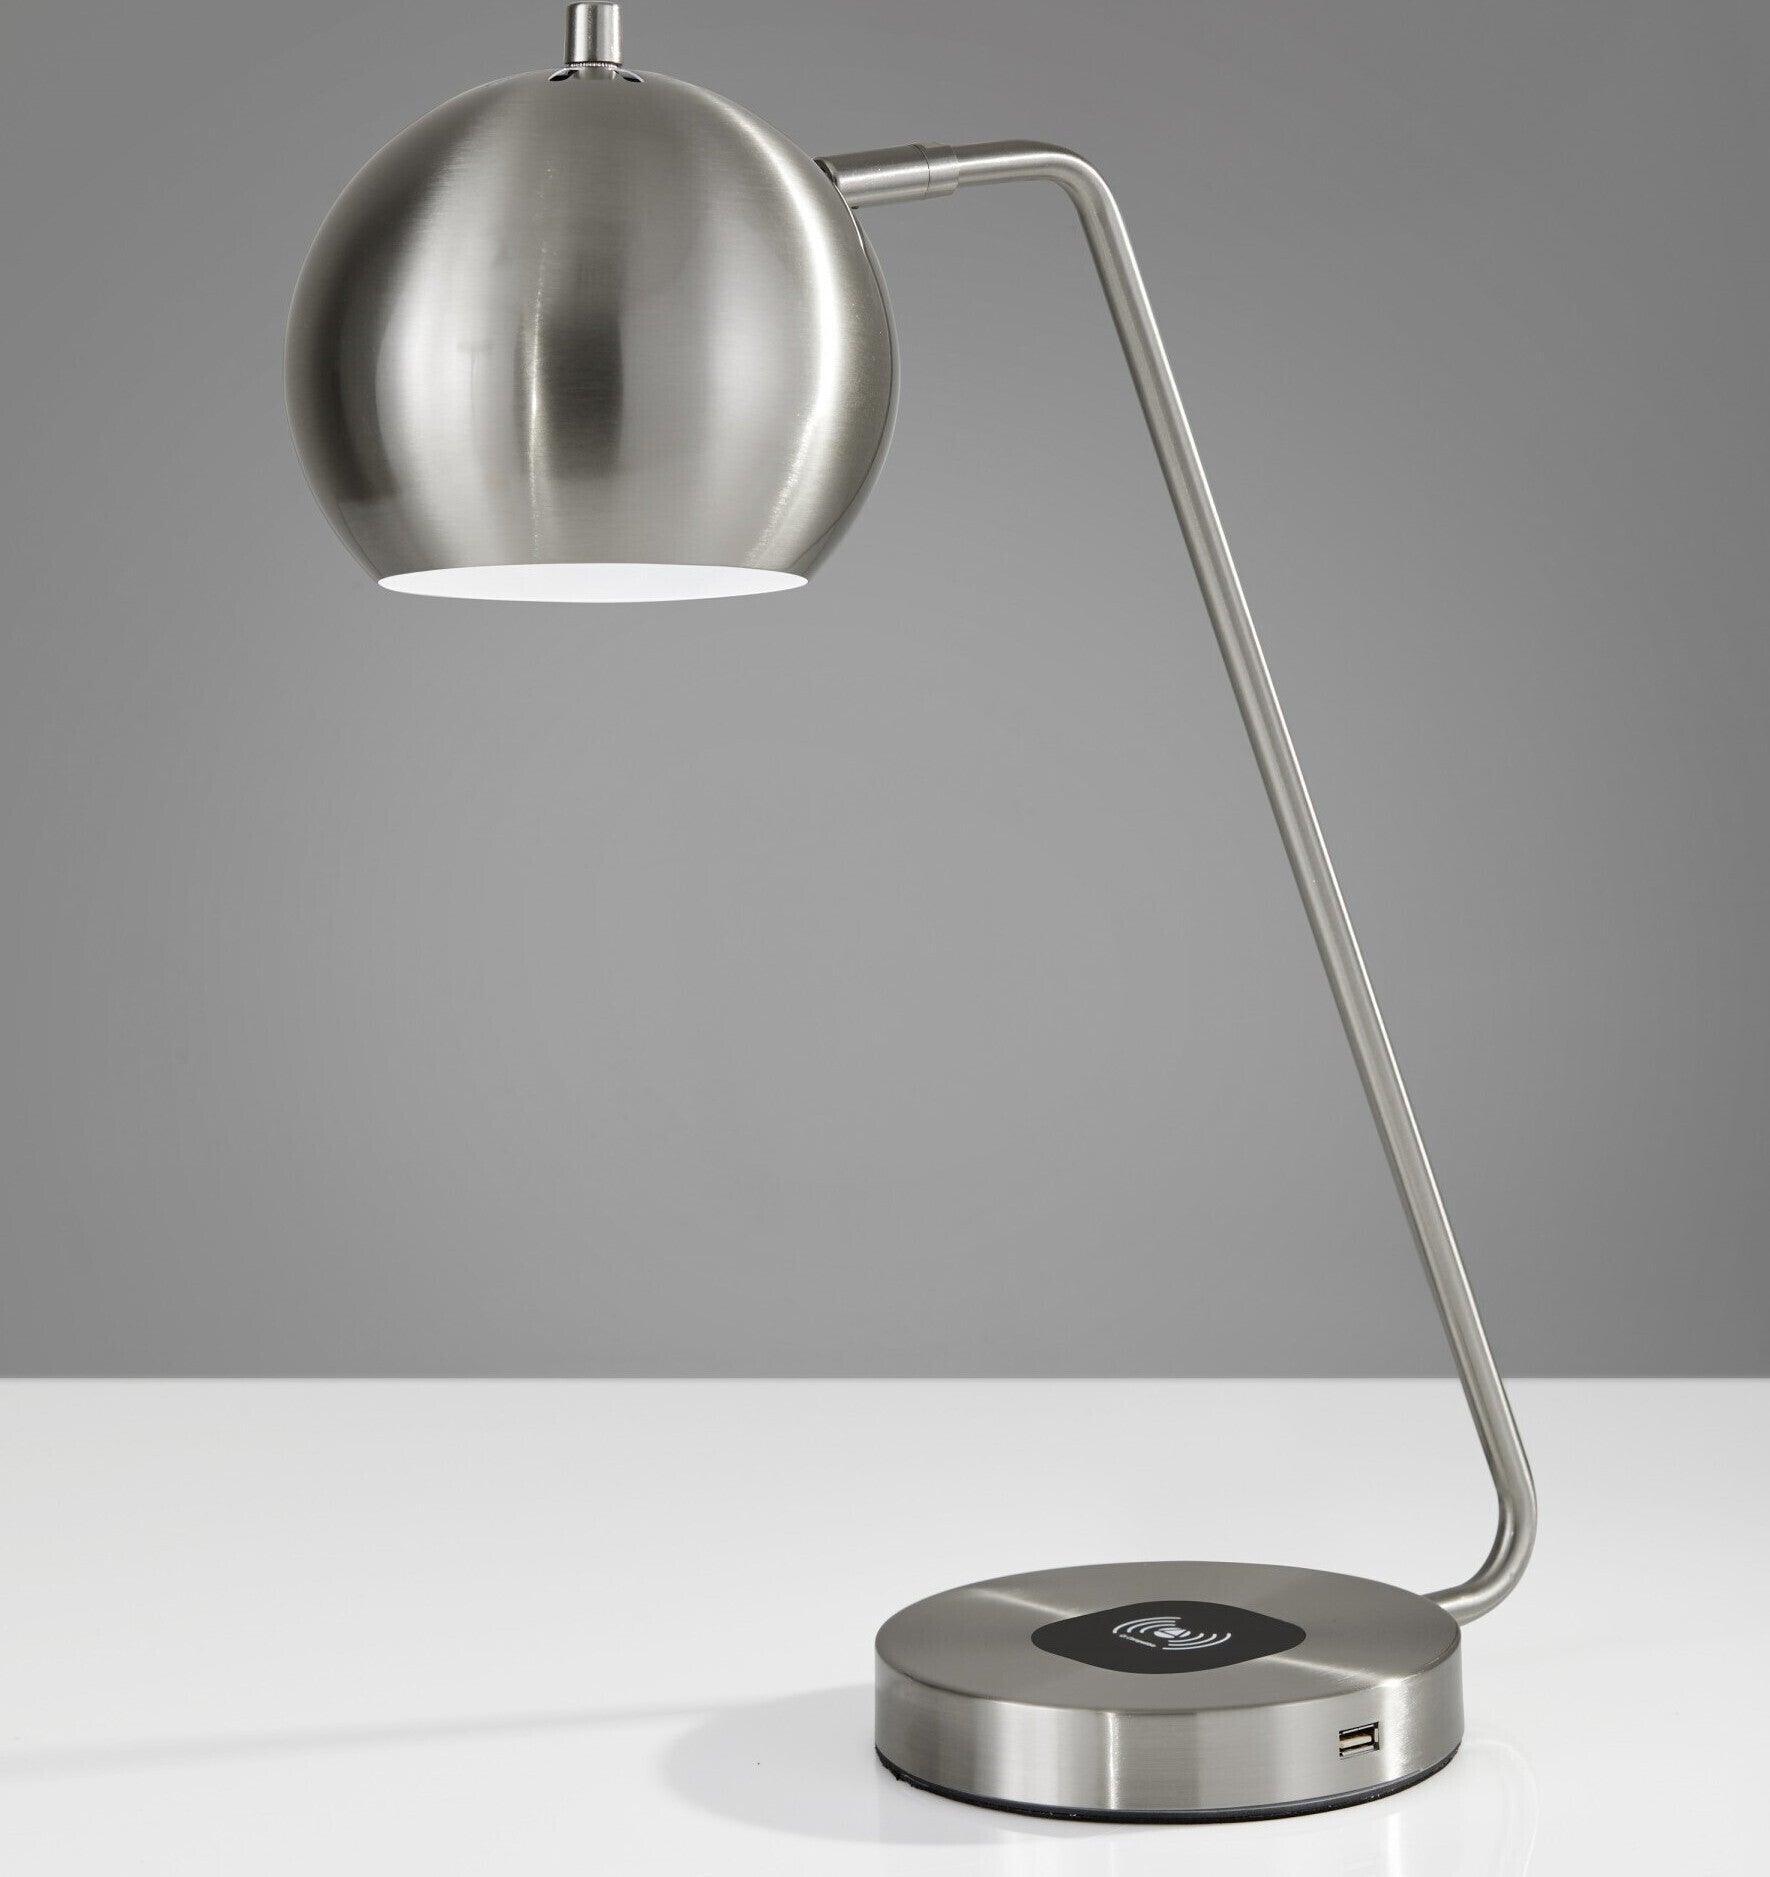 Adesso Desk Lamps - Emerson Charge Desk Lamp Brushed Steel